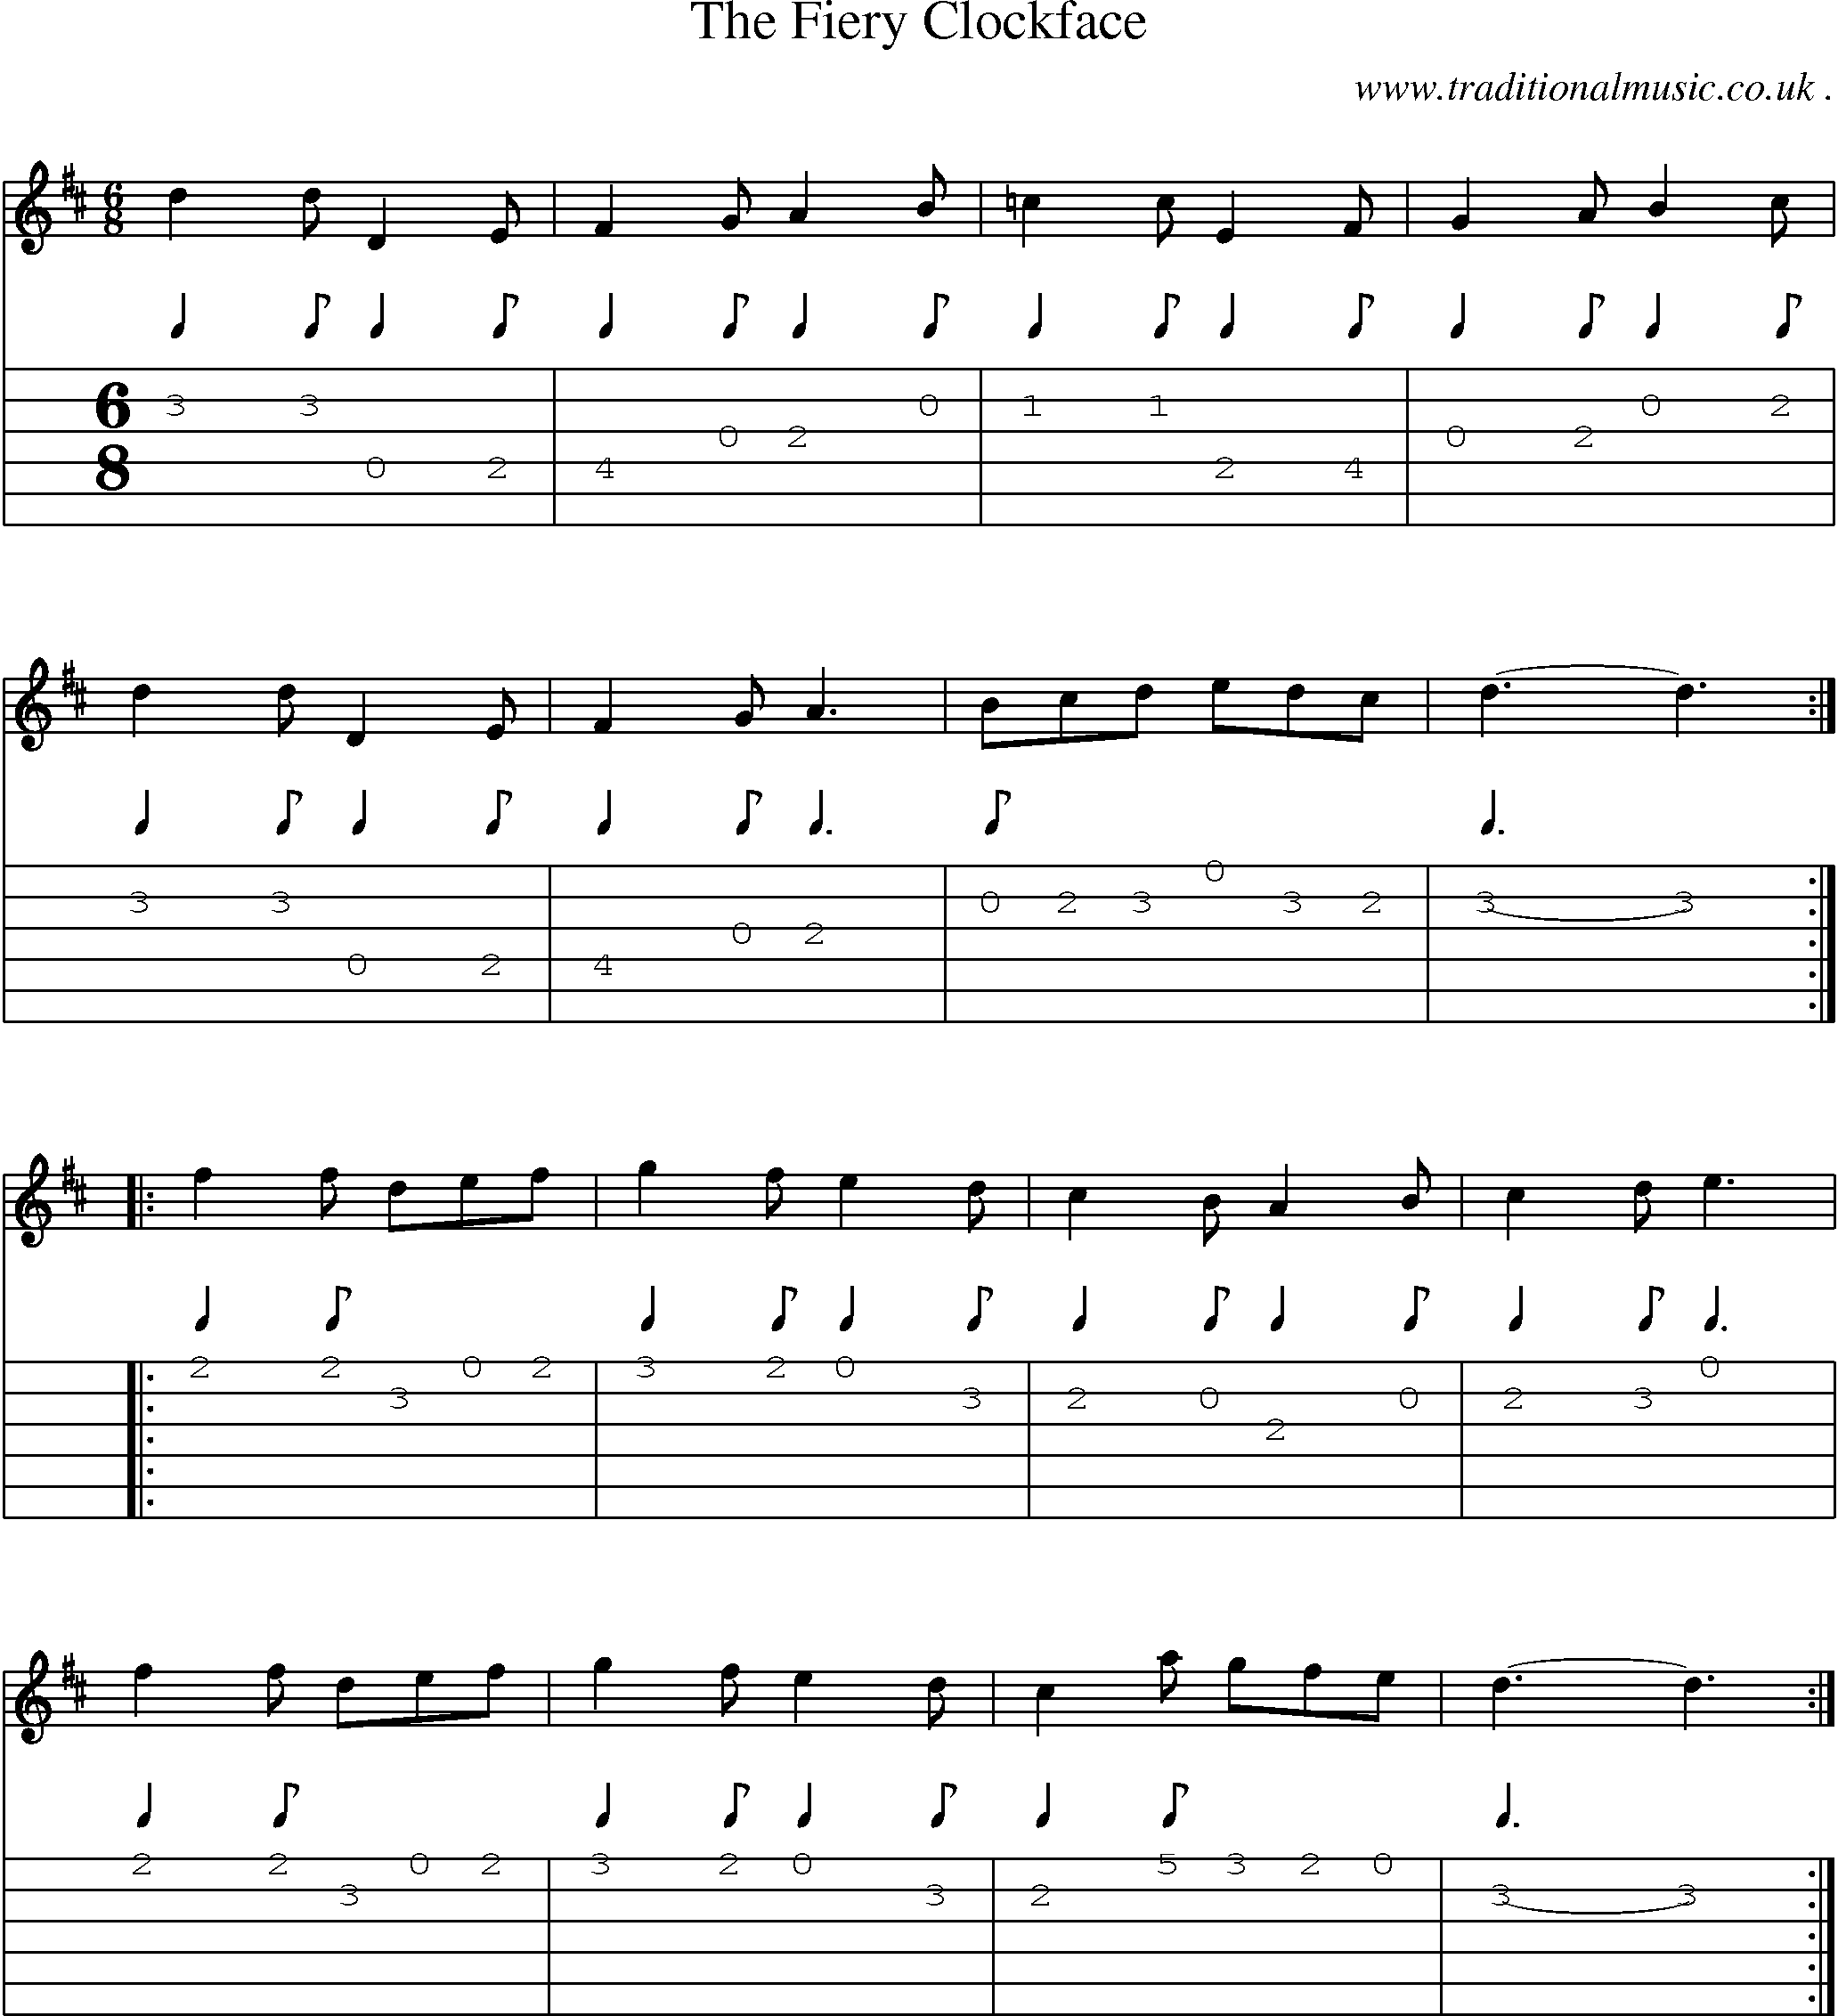 Sheet-Music and Guitar Tabs for The Fiery Clockface